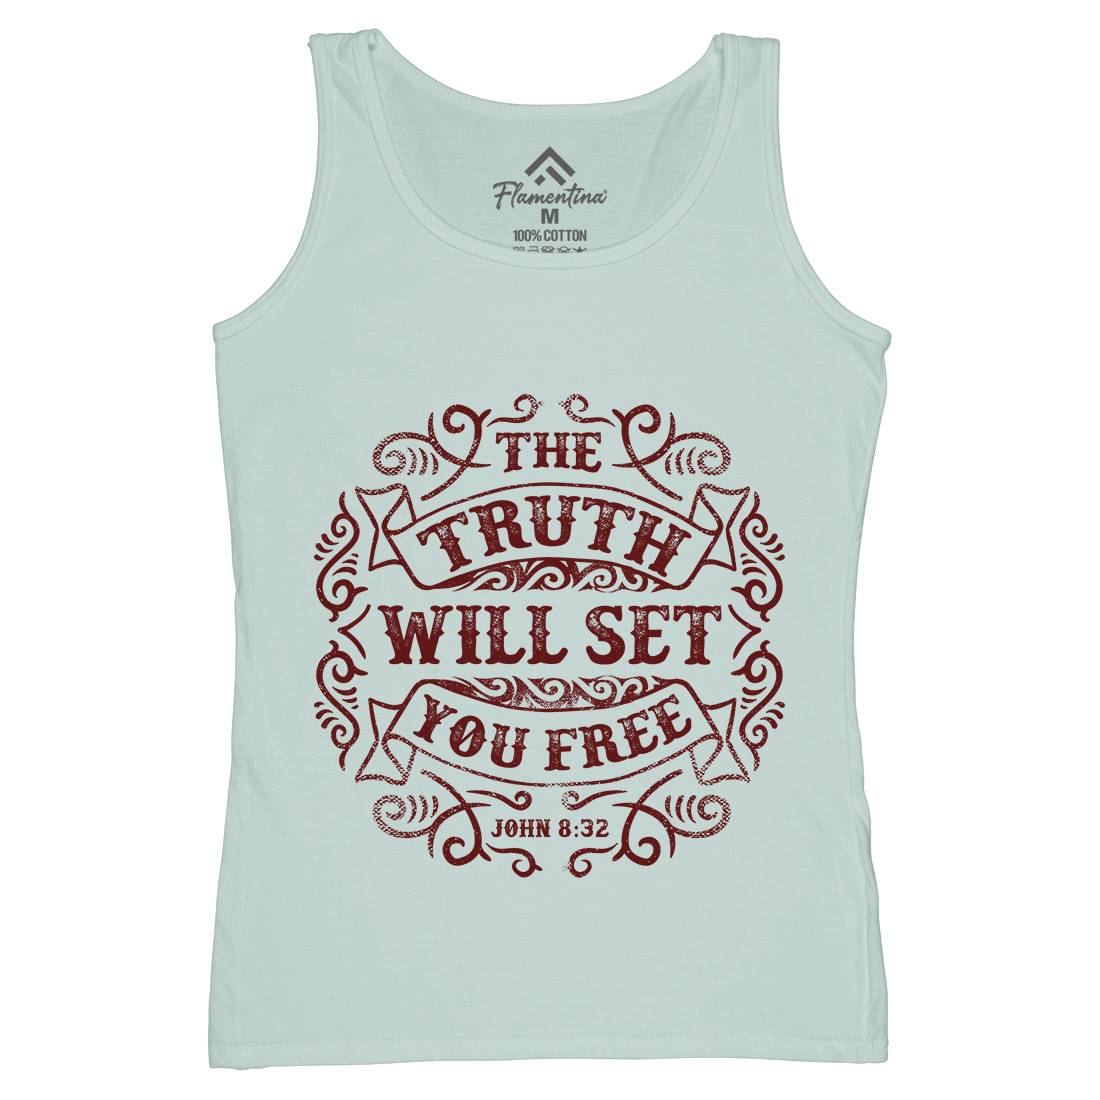 The Truth Will Set You Free Womens Organic Tank Top Vest Religion C990